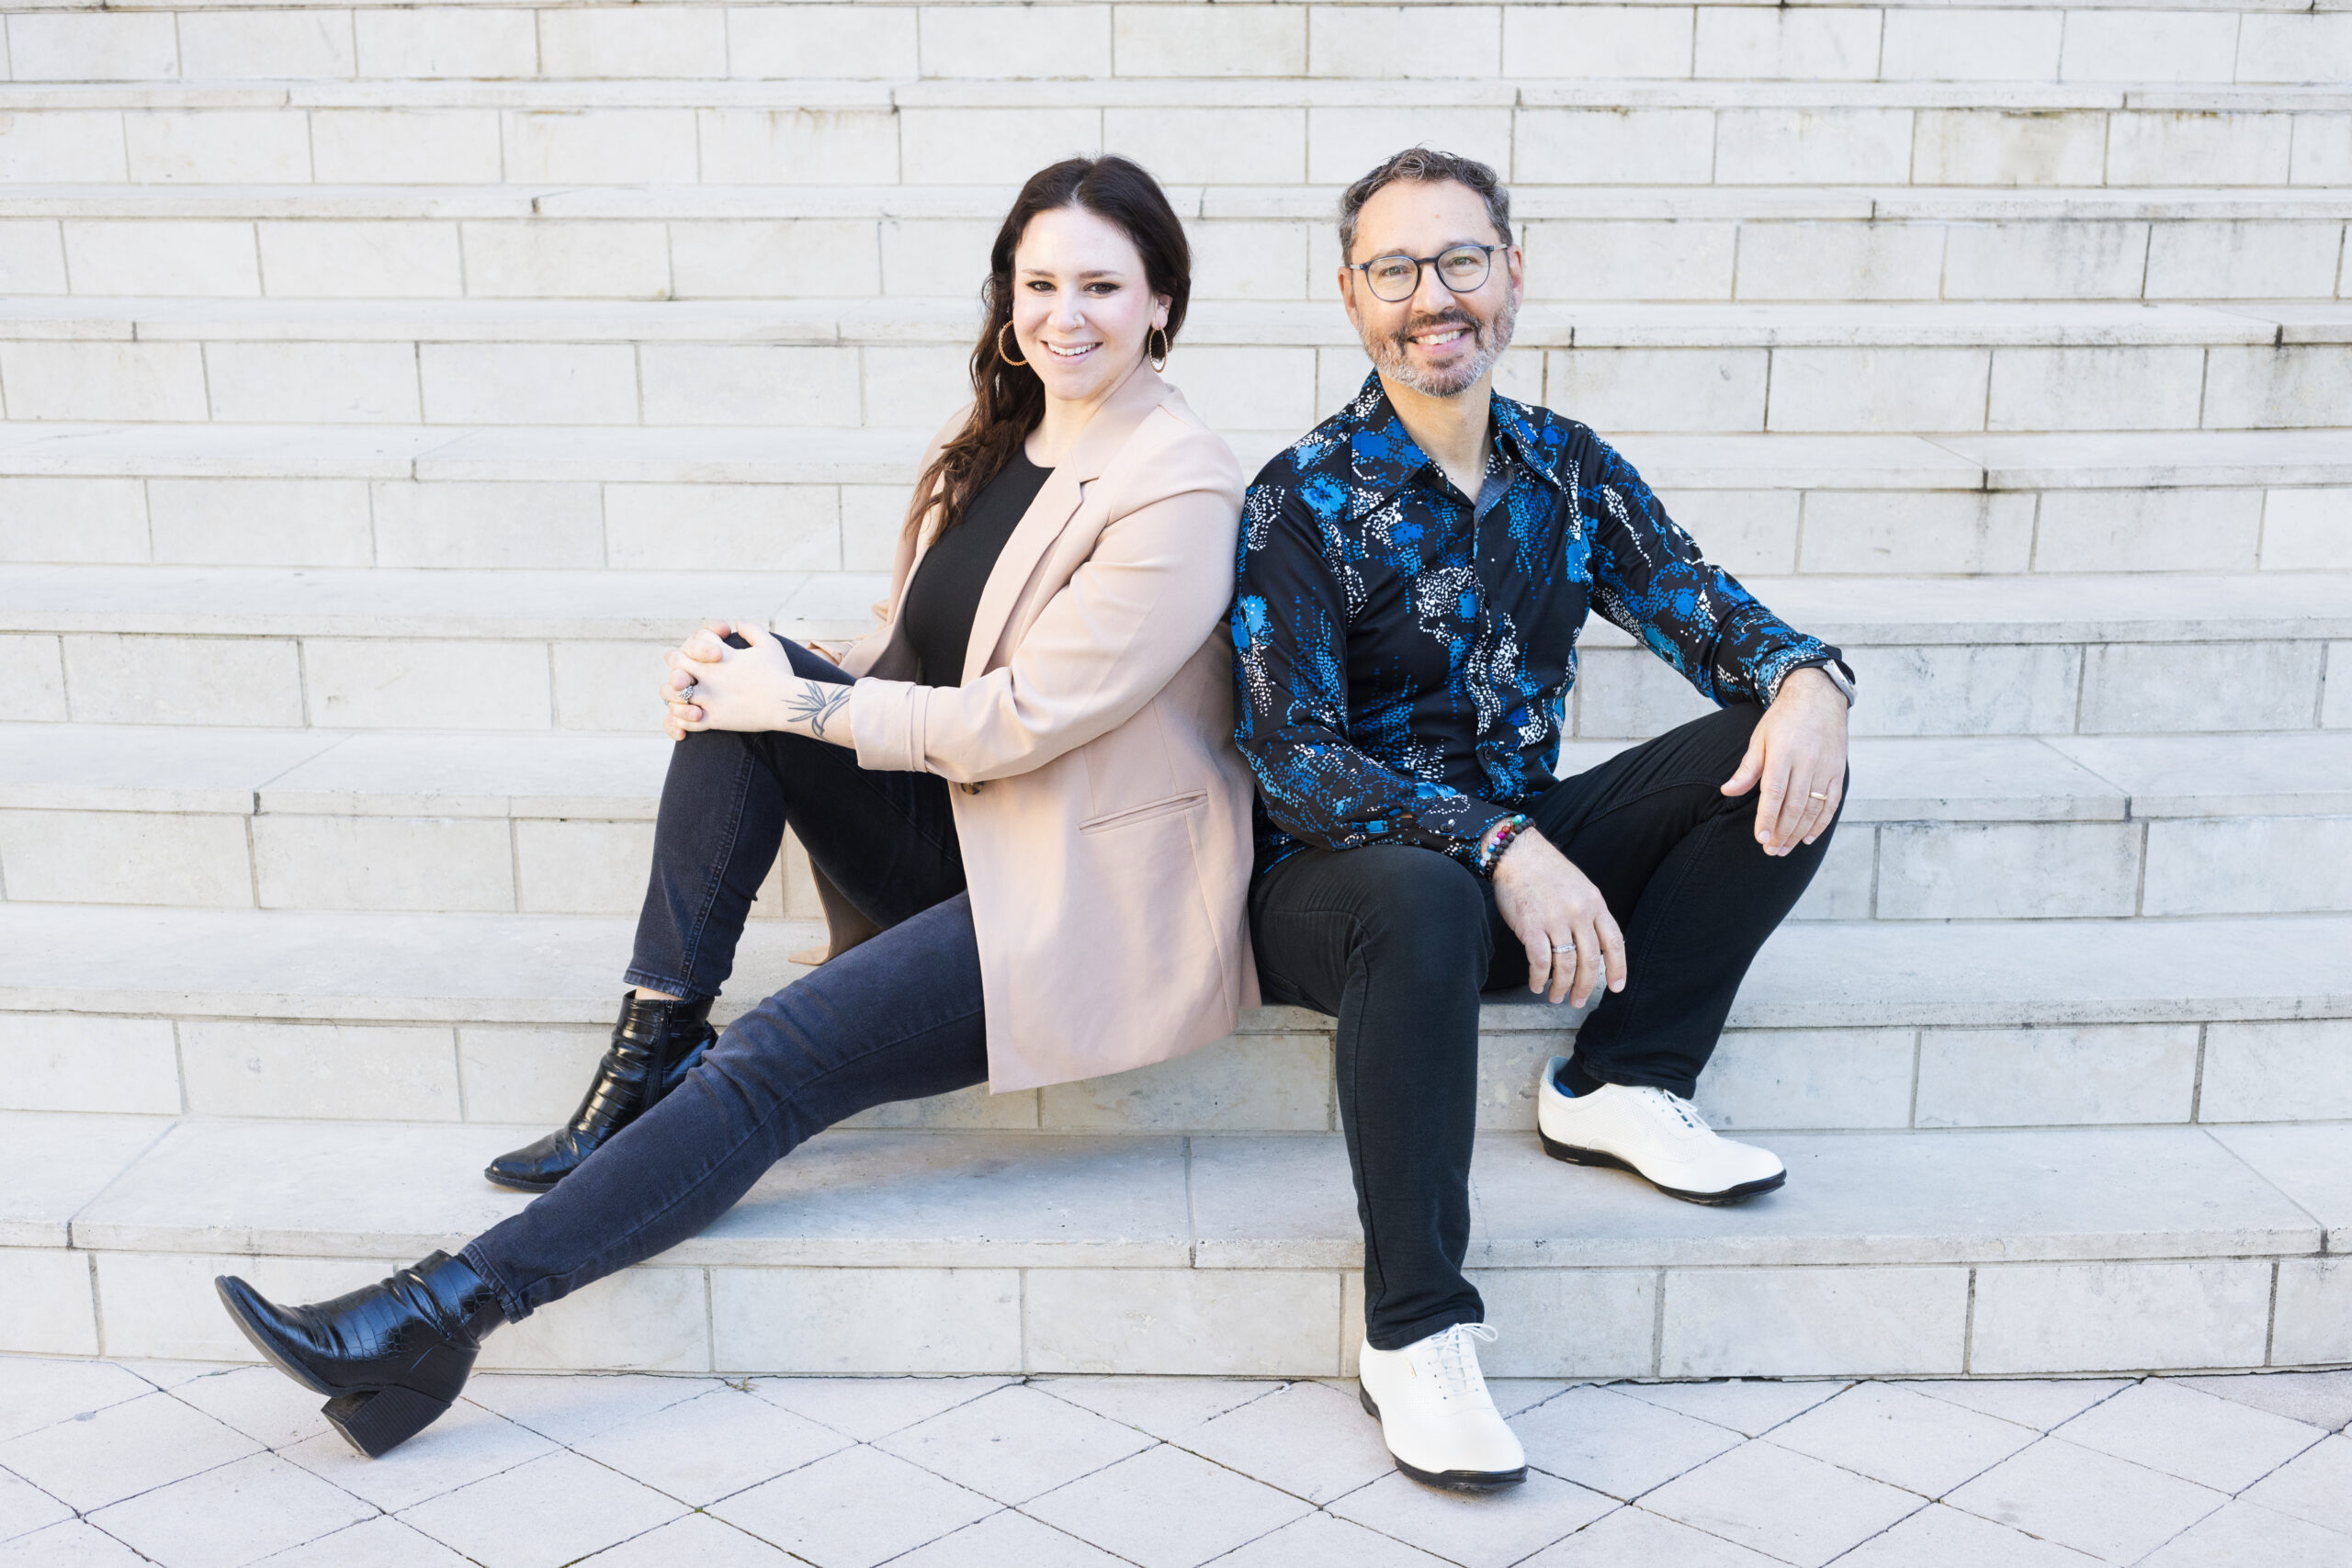 Annie Booth, left, and Alan Baylock noticed a dearth of female representation in jazz composing. So they decided to do something about it, and so Brava Jazz Publishing was born.